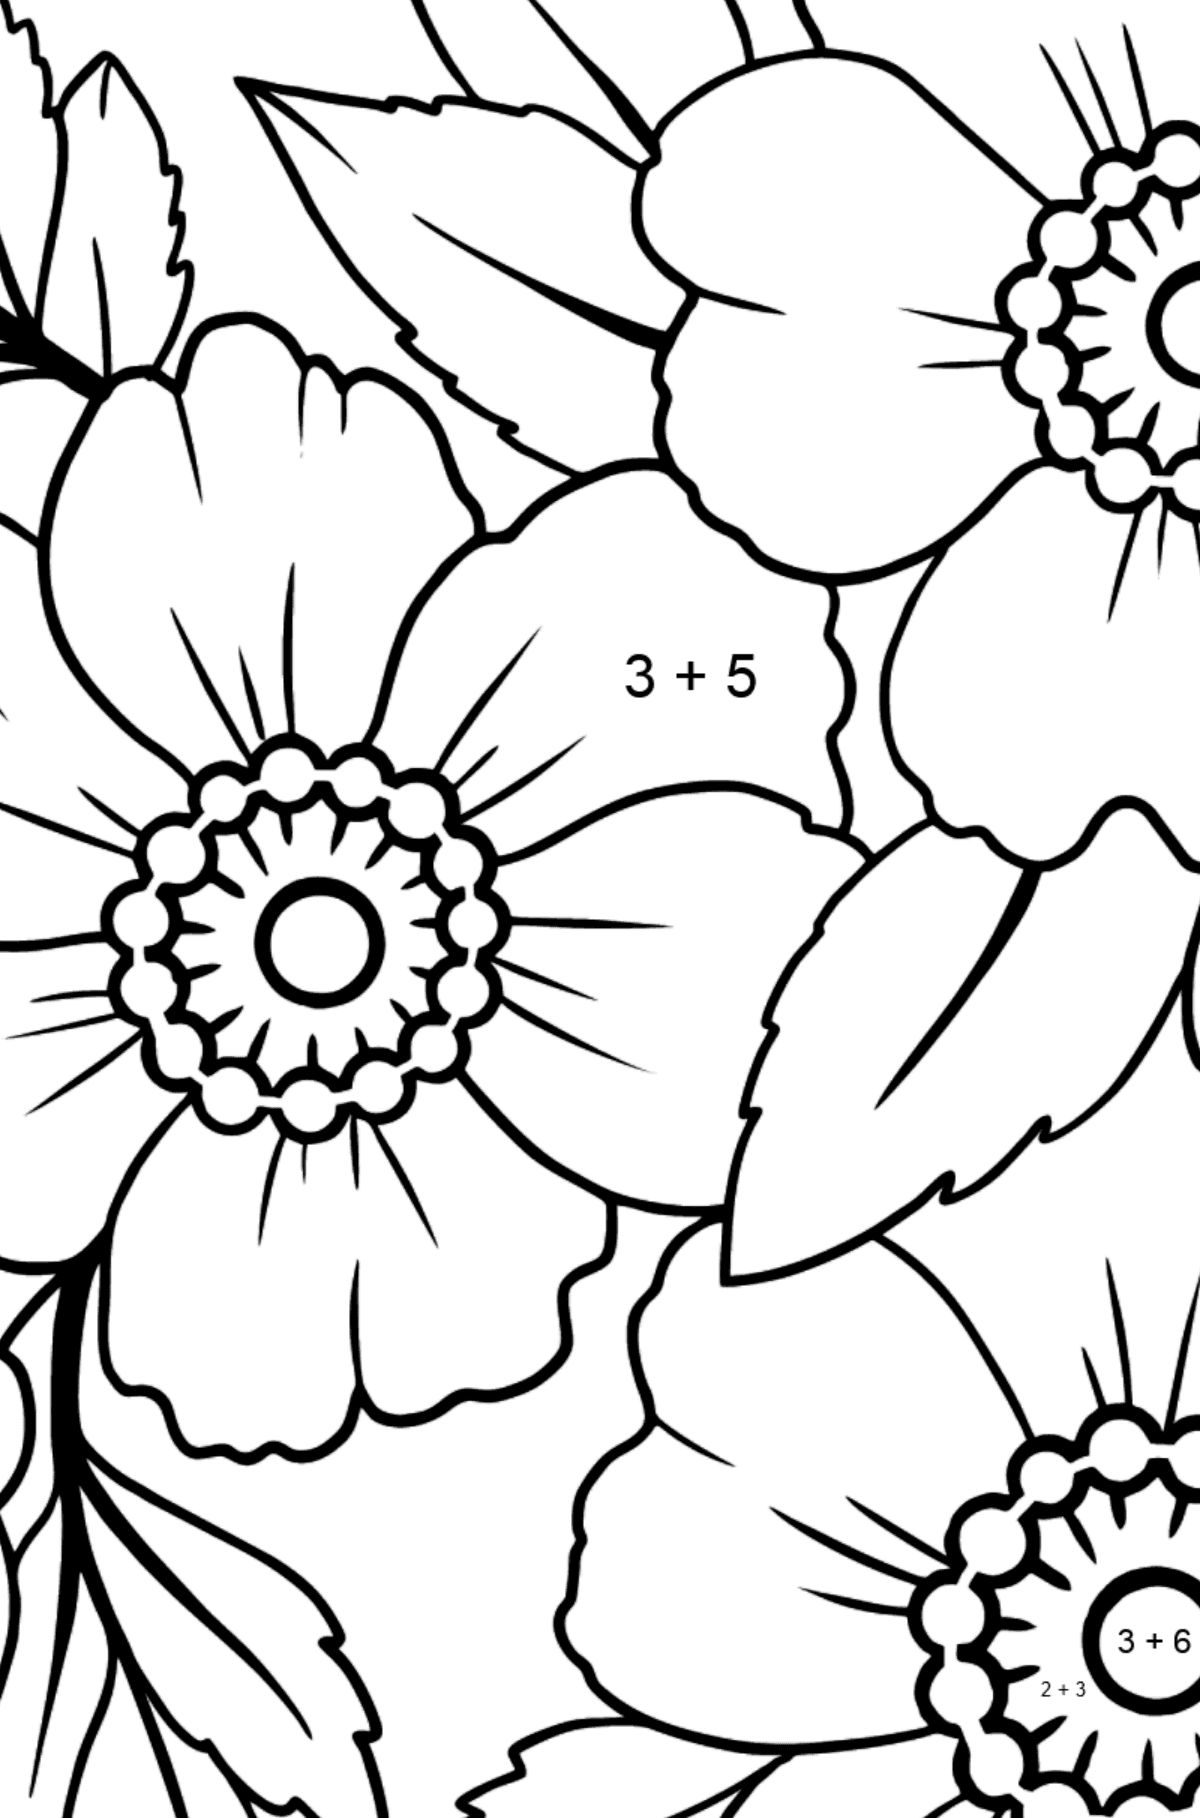 Flower Coloring Page - Japanese Velvet Anemone - Math Coloring - Addition for Kids